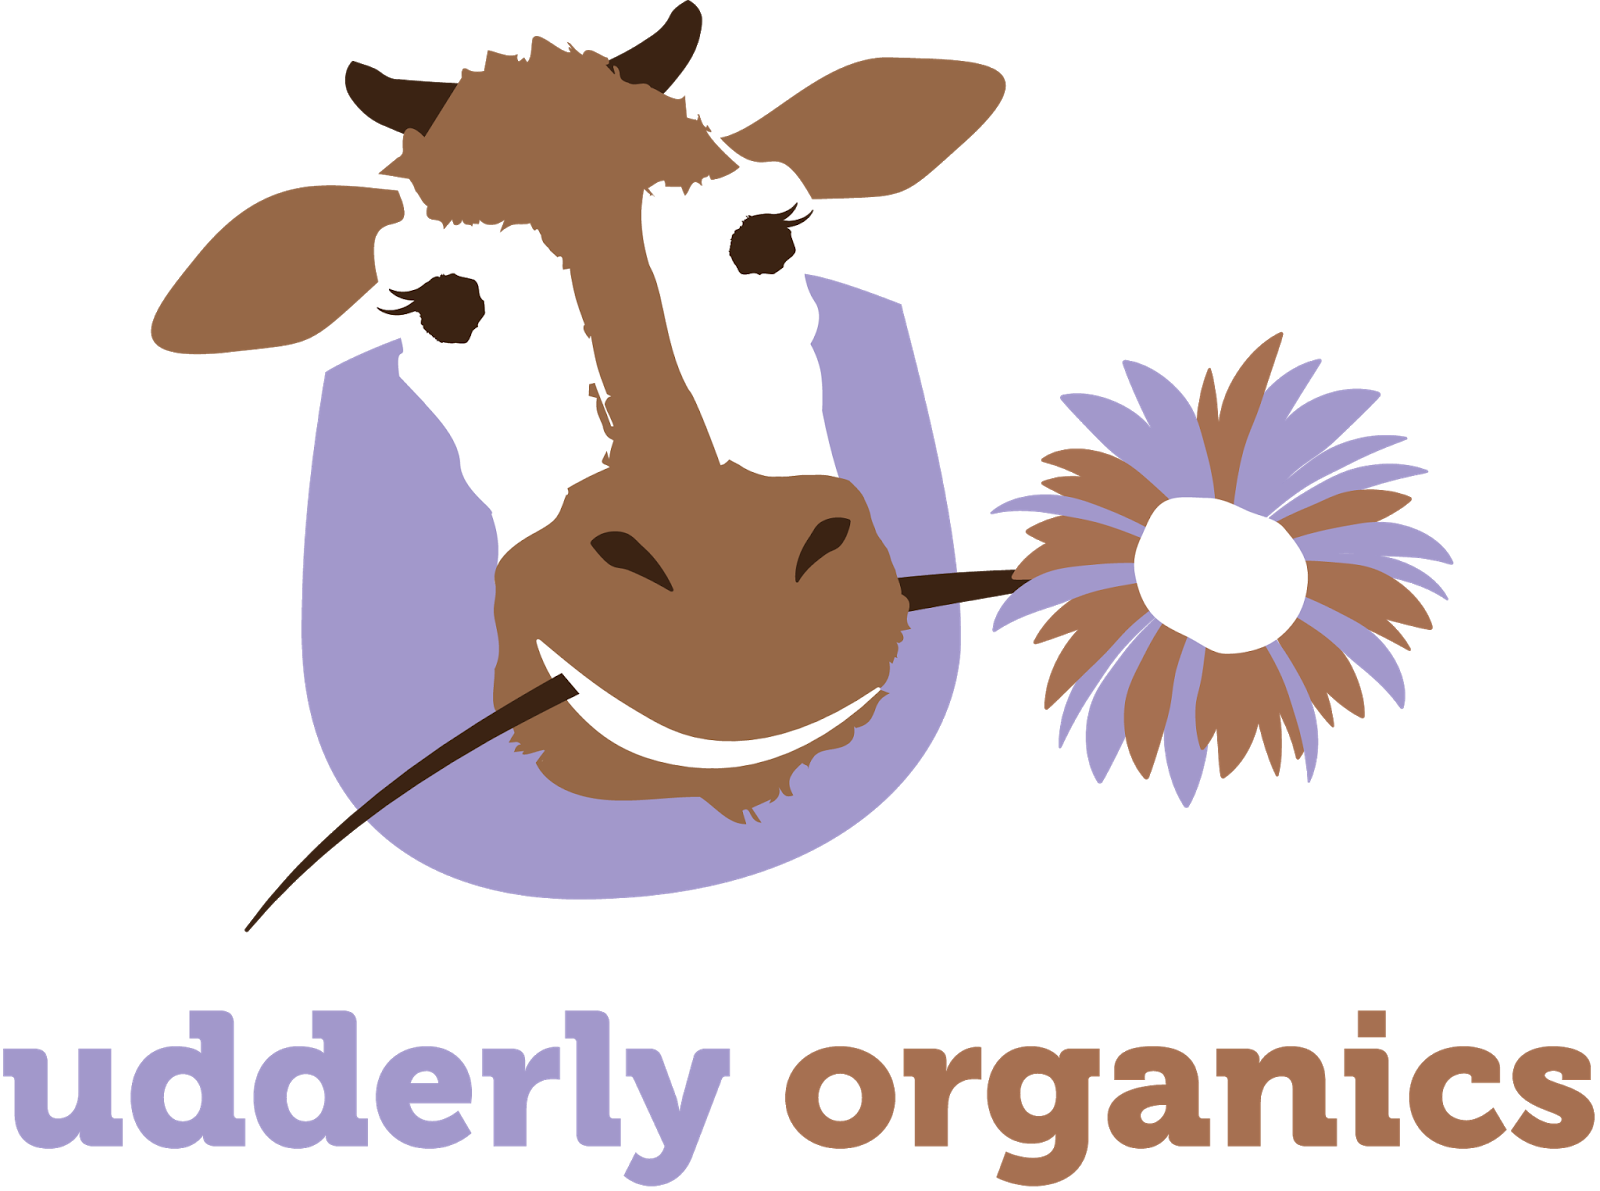 What we love about. Dairy clipart beneficial